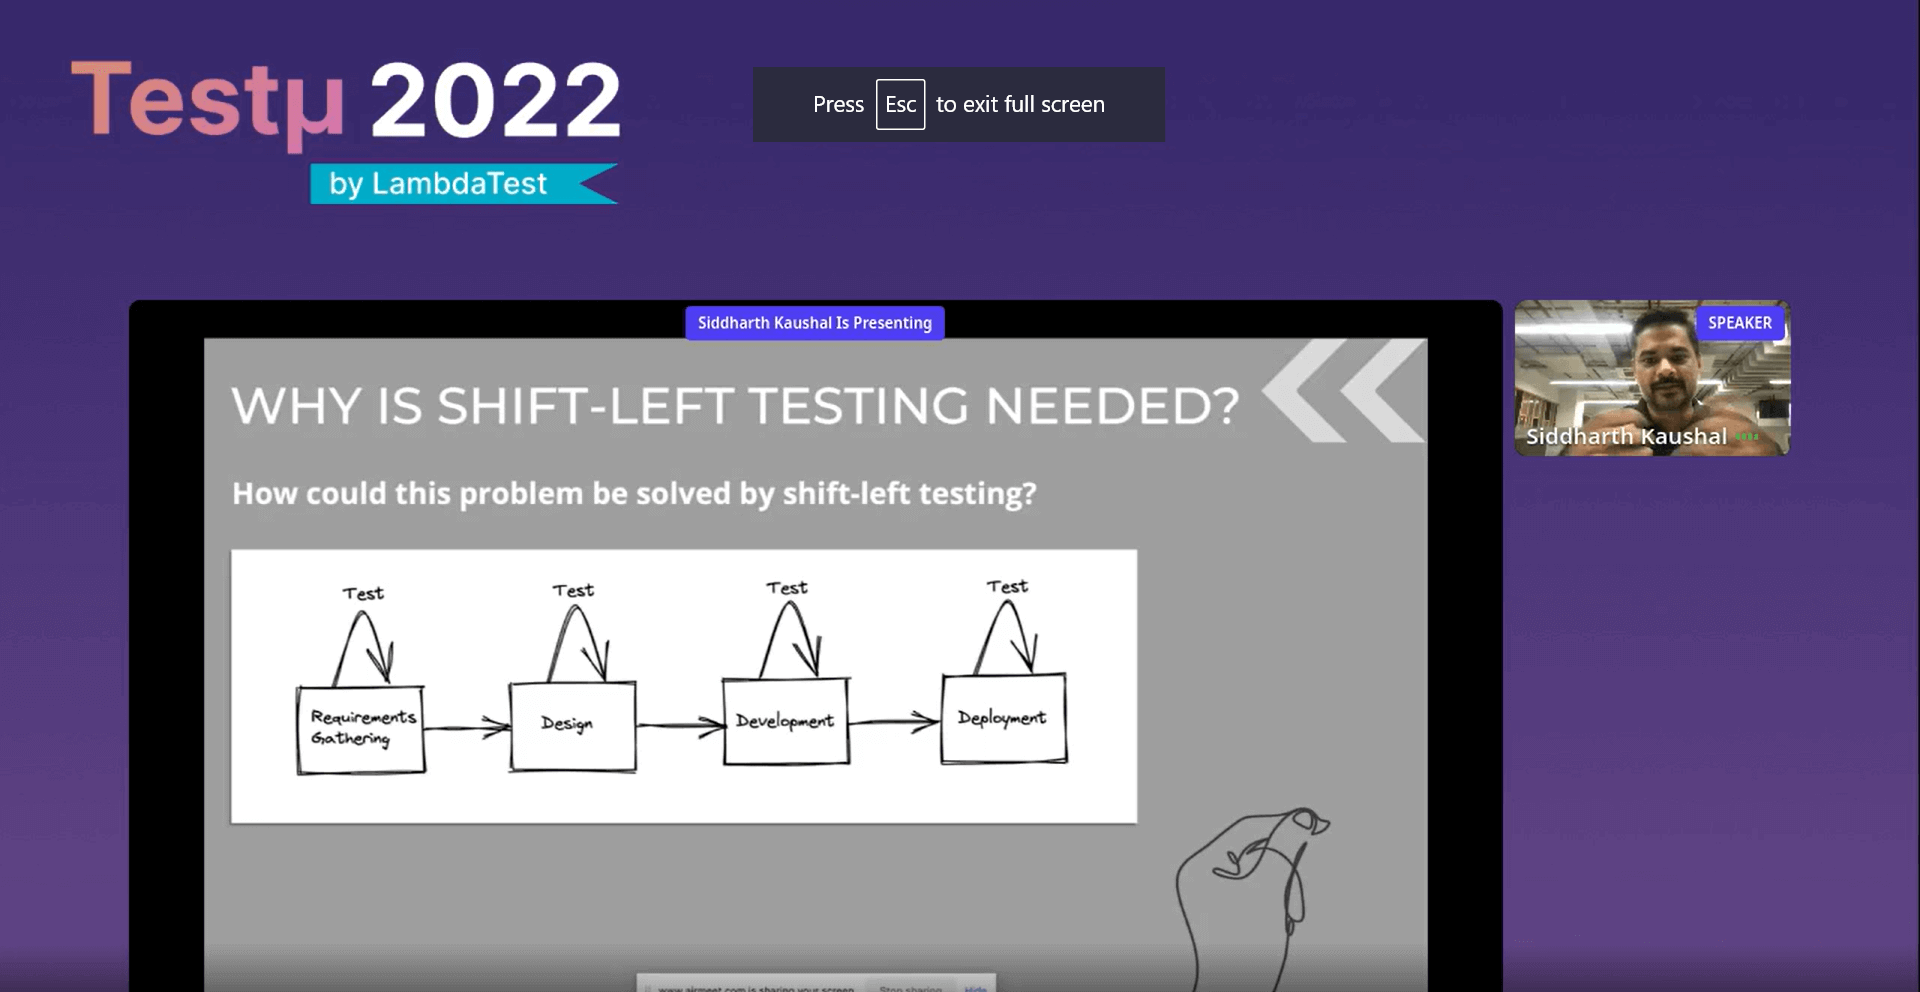 explained the process behind applying shift-left testing